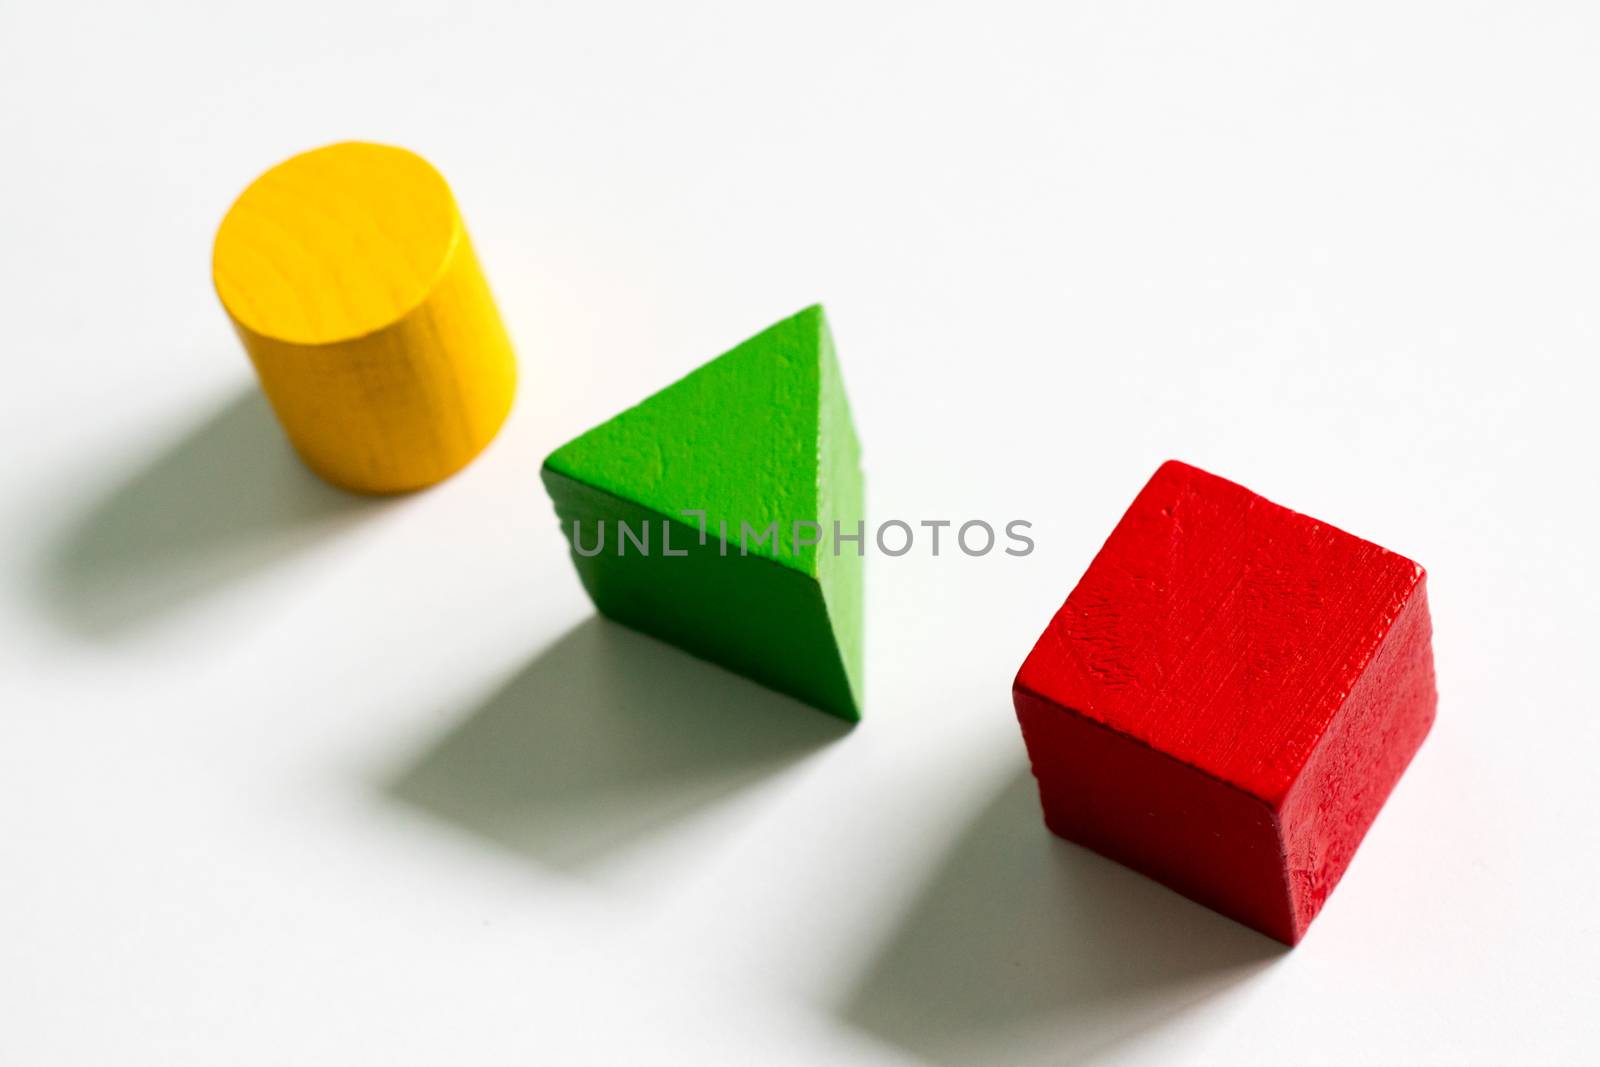 Set of colorful wooden shape toy (Square, triangle, round) on white background